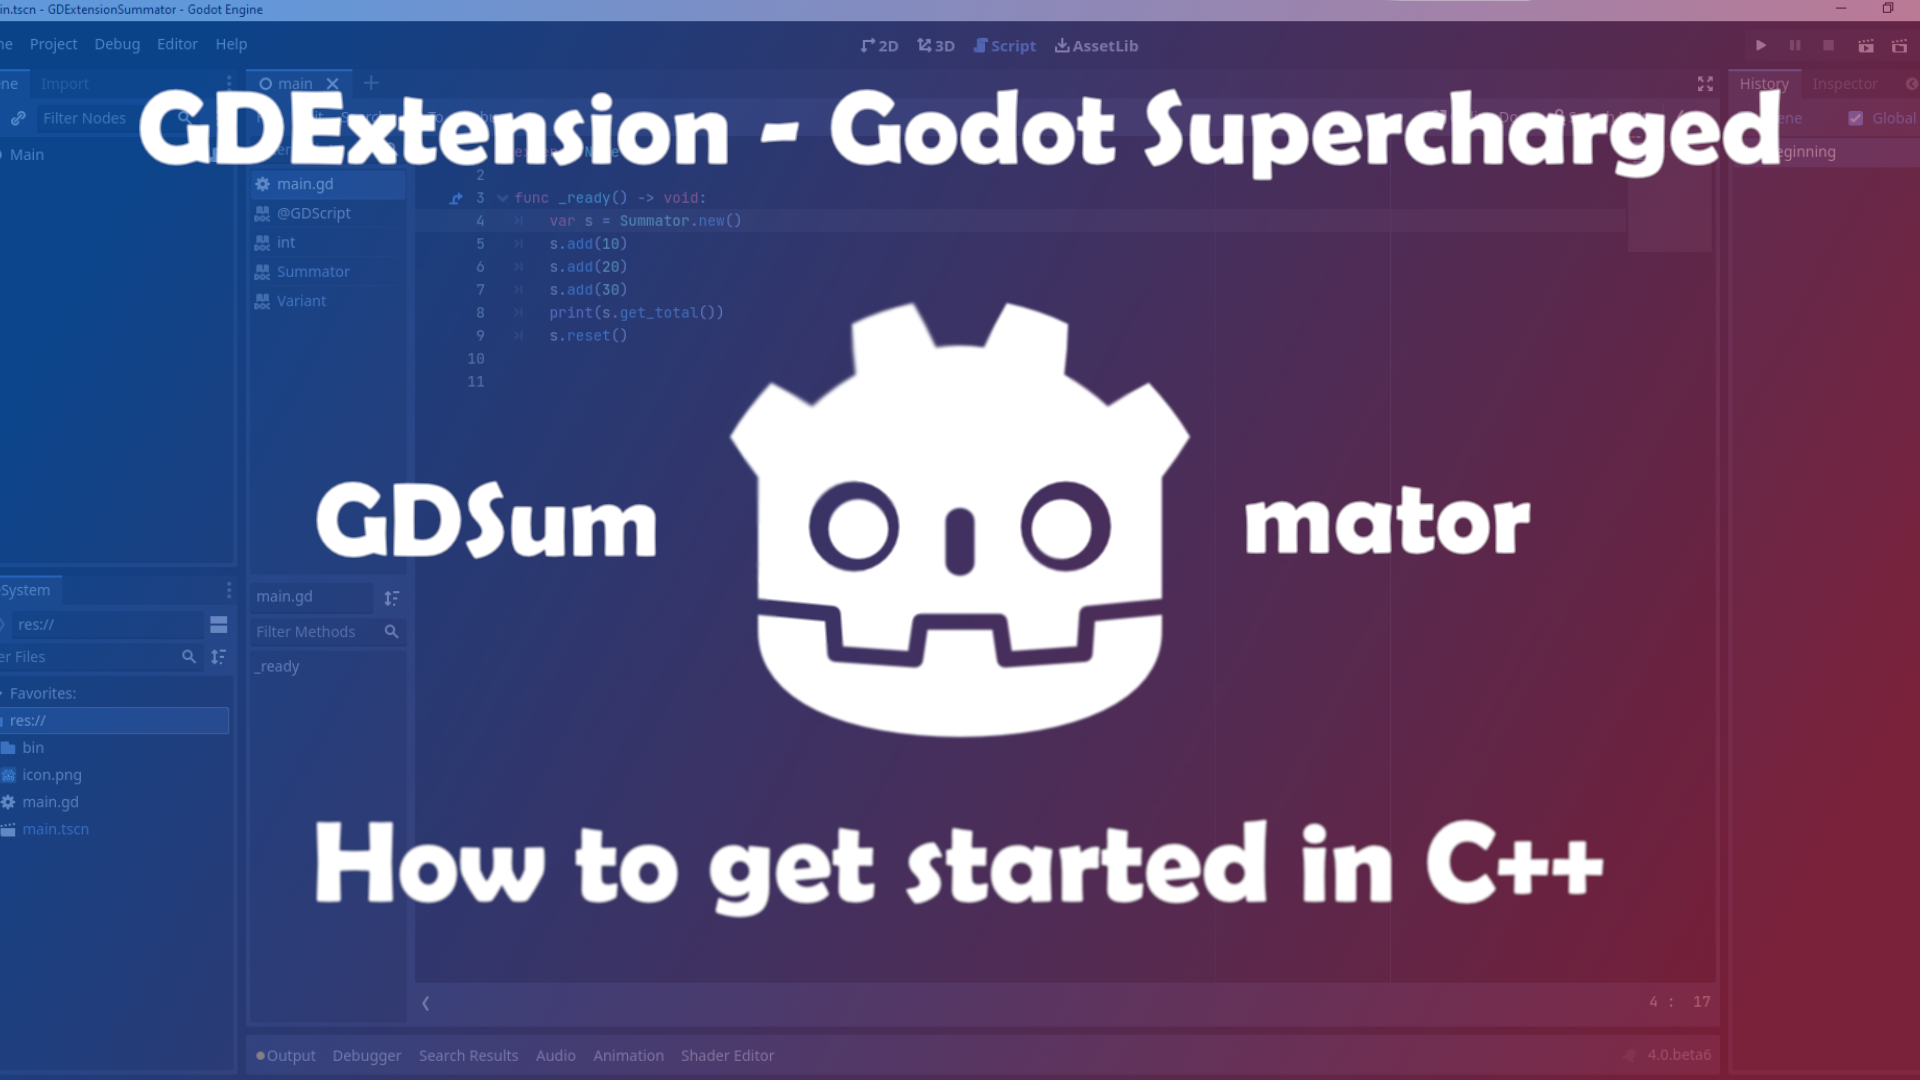 GDExtension - How to get started in C++